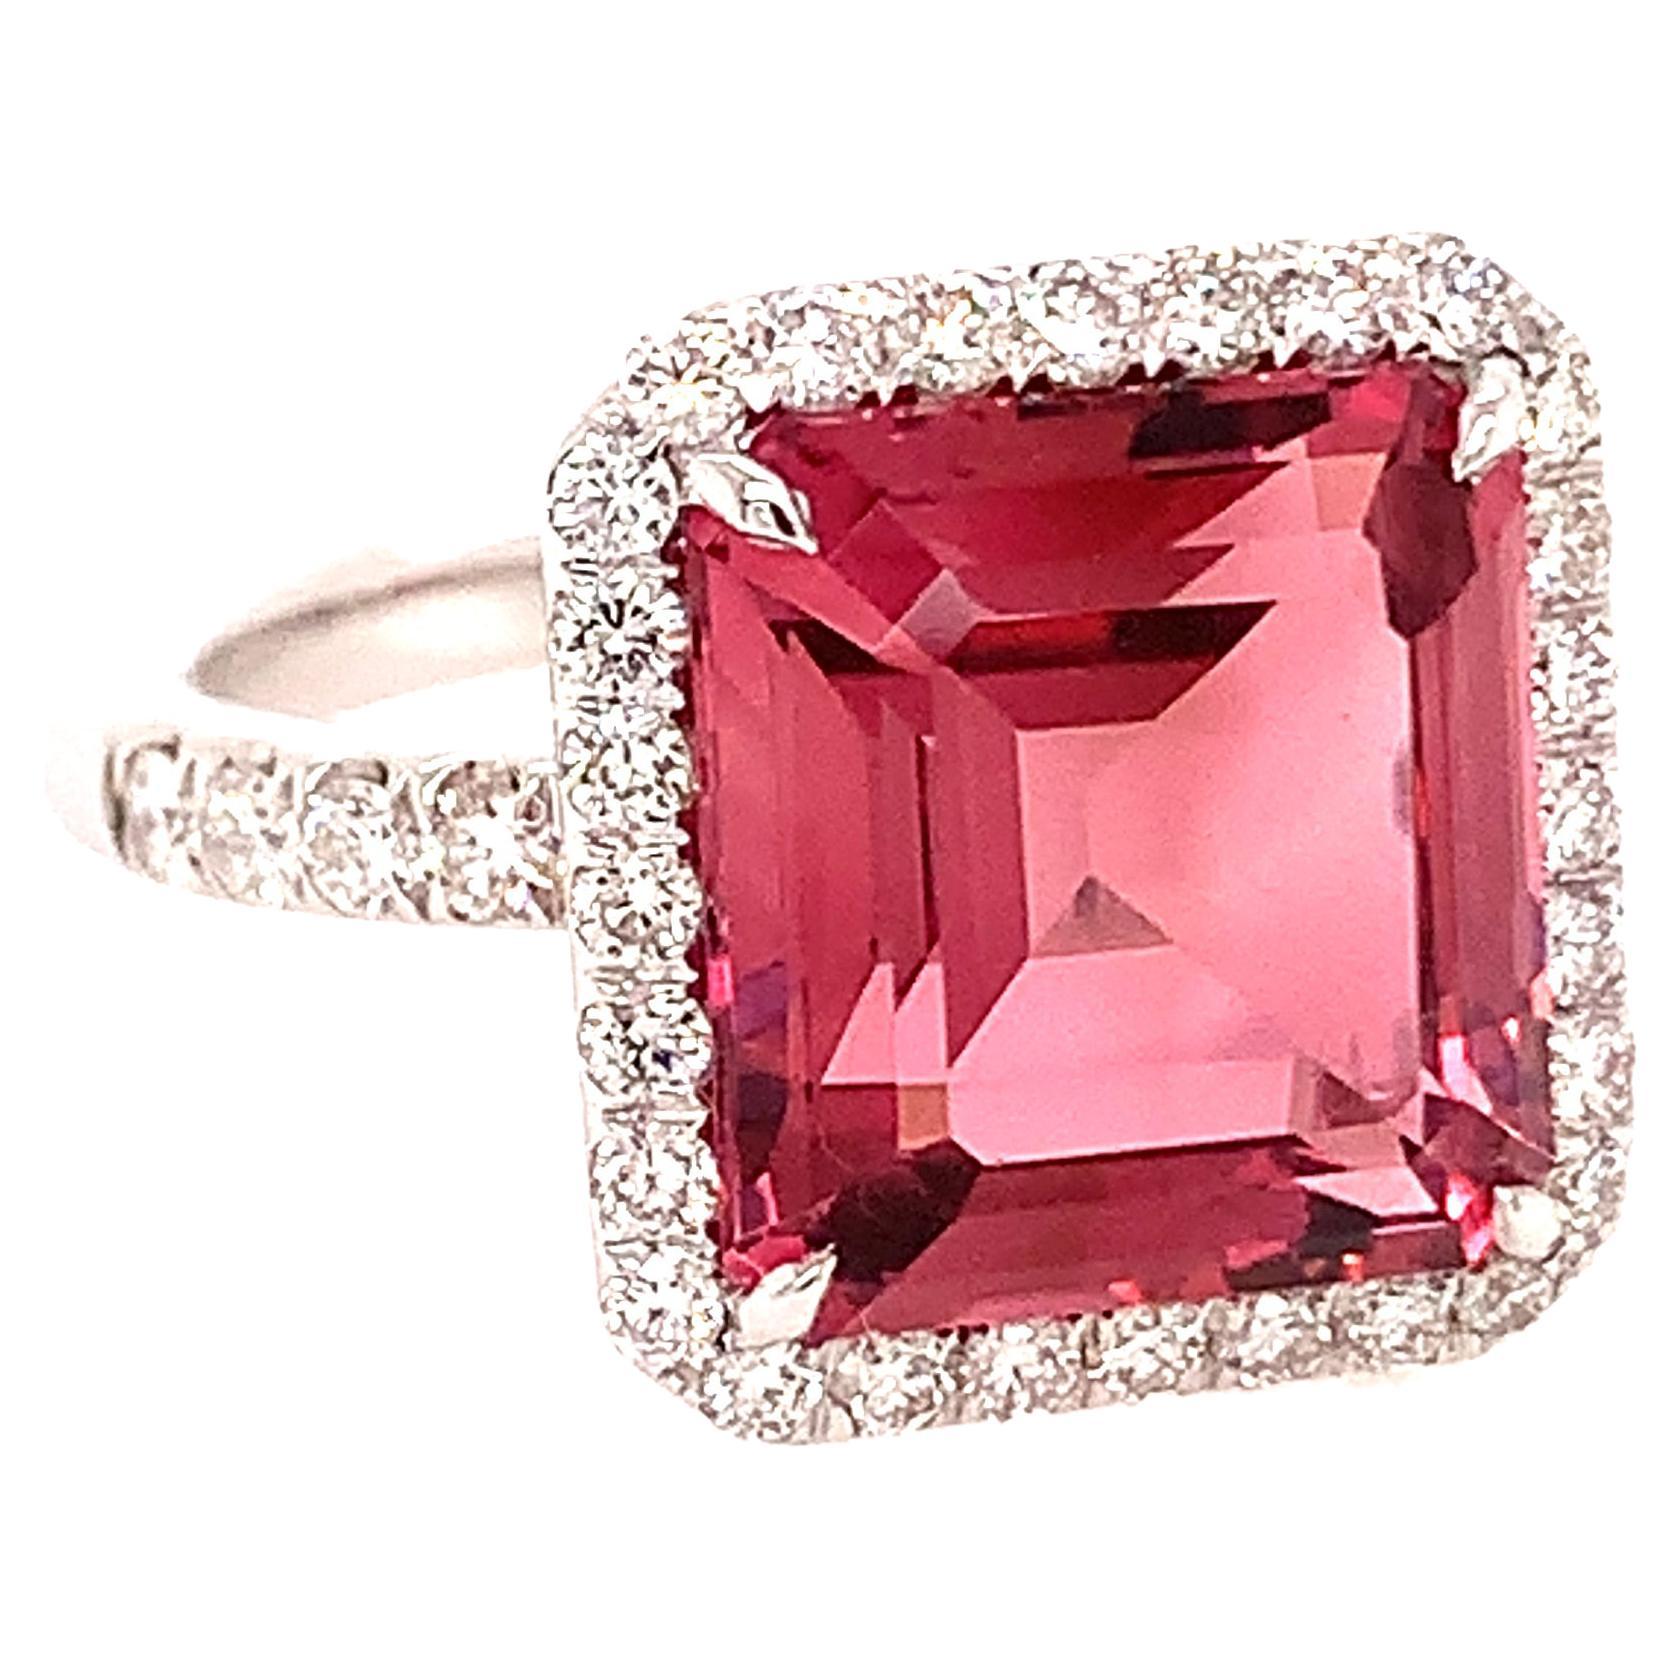 18kt White Gold One of A Kind Ring with Square Pink Tourmaline and Diamonds